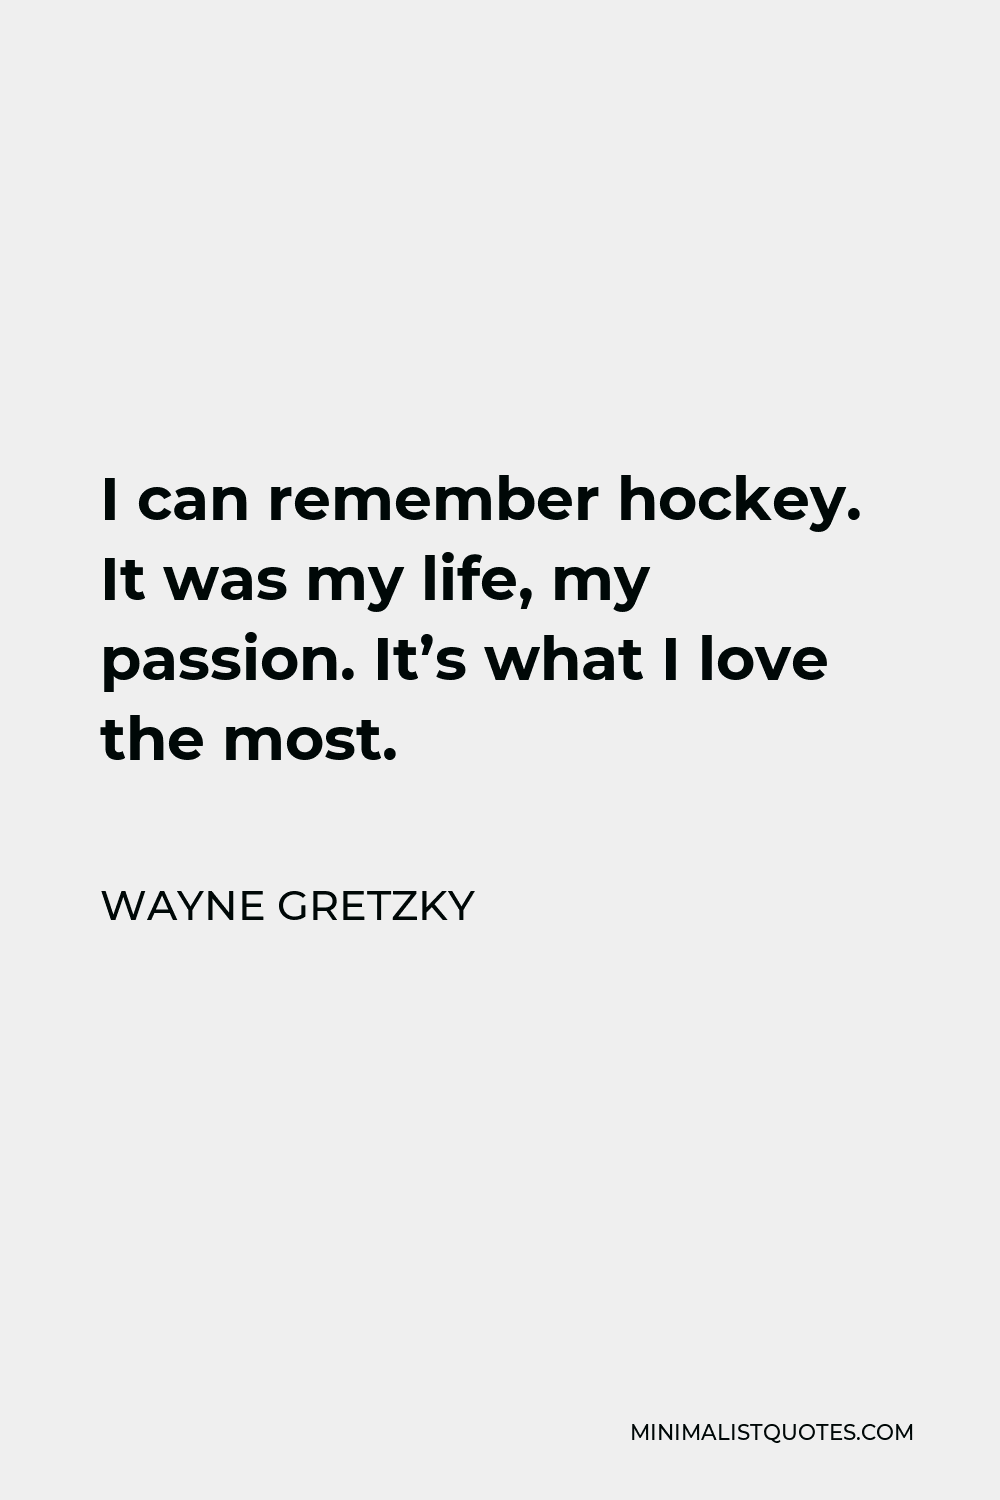 Wayne Gretzky Quote - I can remember hockey. It was my life, my passion. It’s what I love the most.